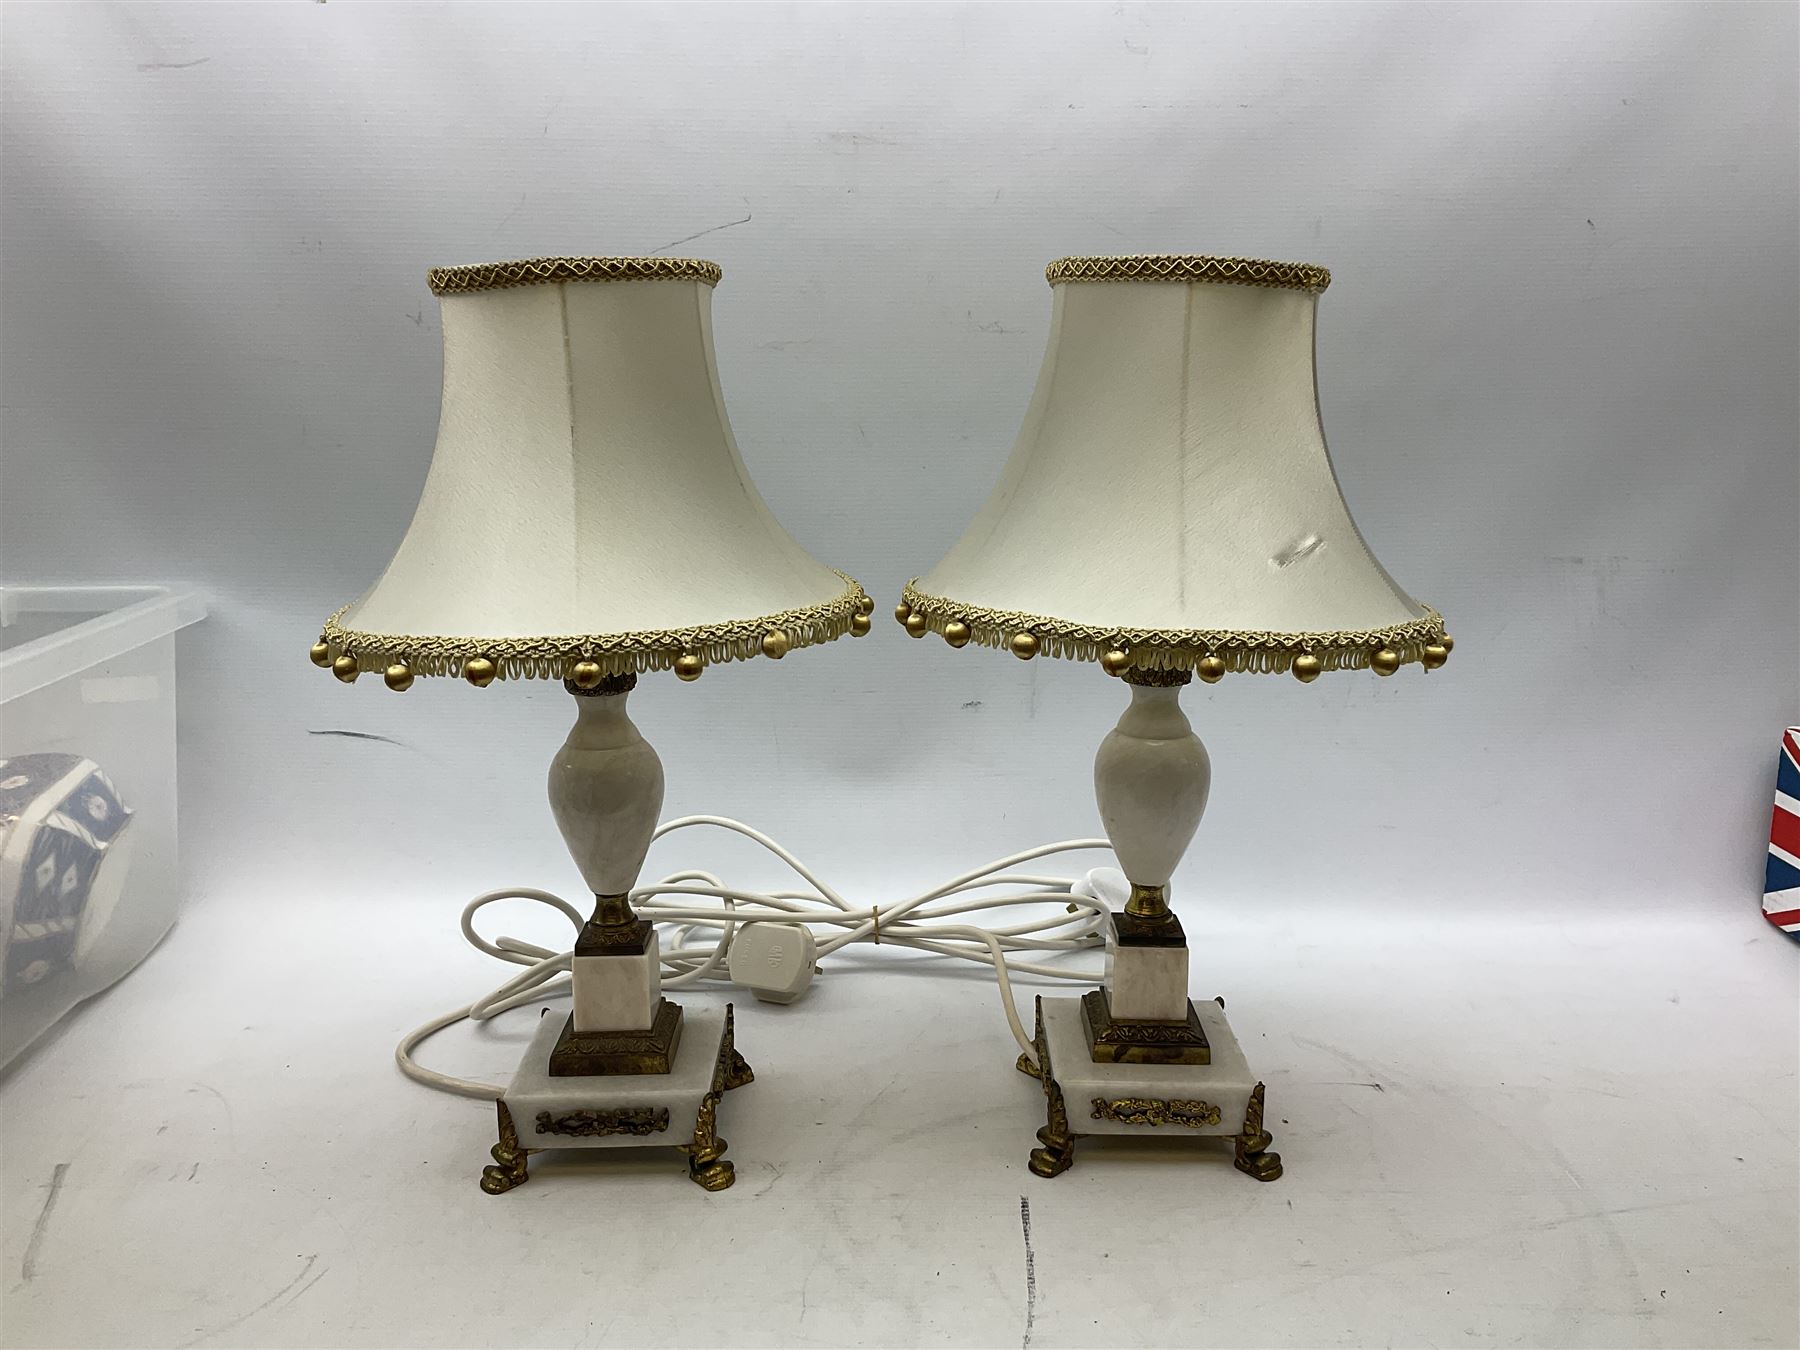 Pair of 20th century marble effect table lamps with gilded decoration - Image 2 of 6